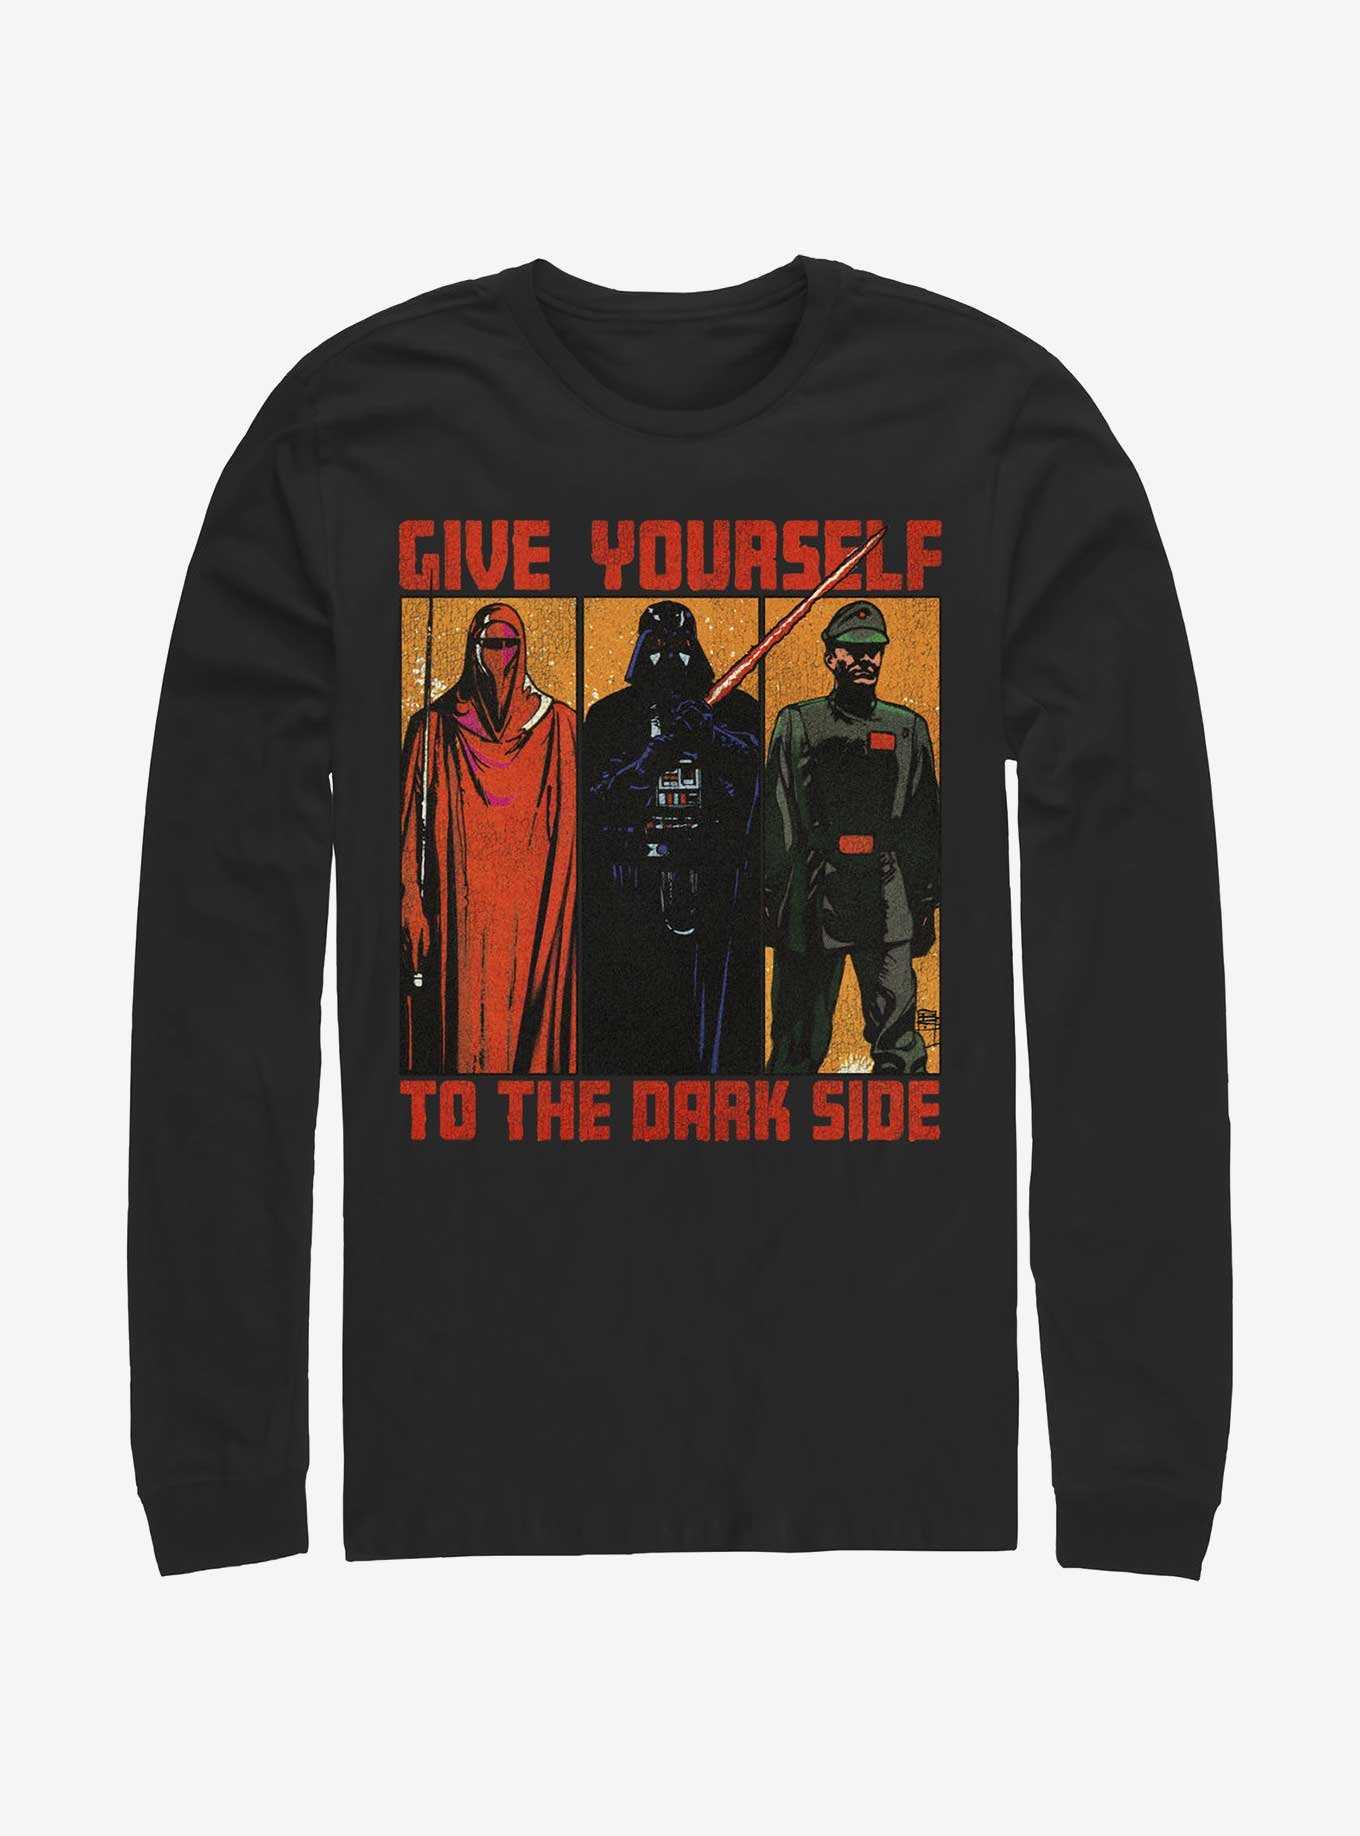 Star Wars Return of the Jedi 40th Anniversary Give Yourself To The Dark Side Long-Sleeve T-Shirt, , hi-res